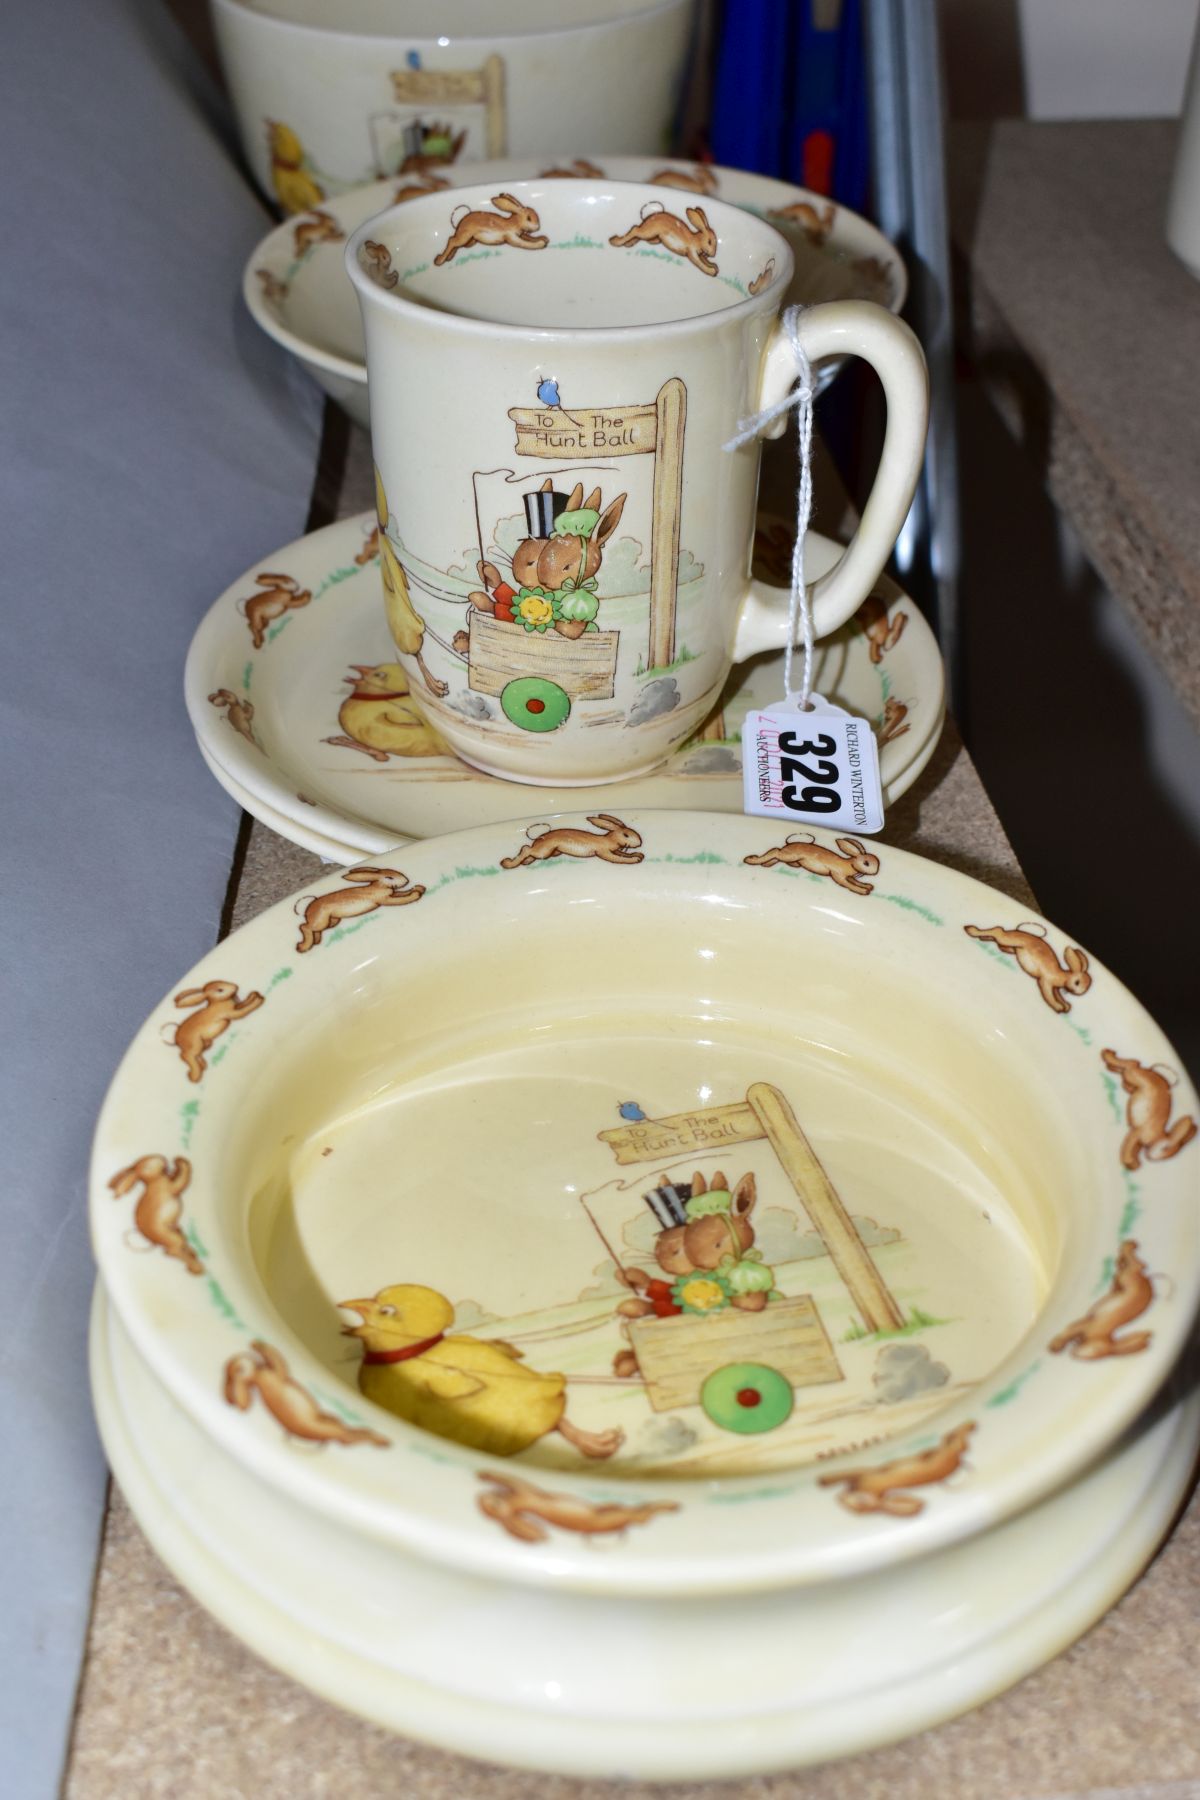 SIX PIECES OF ROYAL DOULTON BUNNYKINS EARTHENWARE TABLES WARES OF CHICKEN PULLING CART, DESIGNED - Image 2 of 10